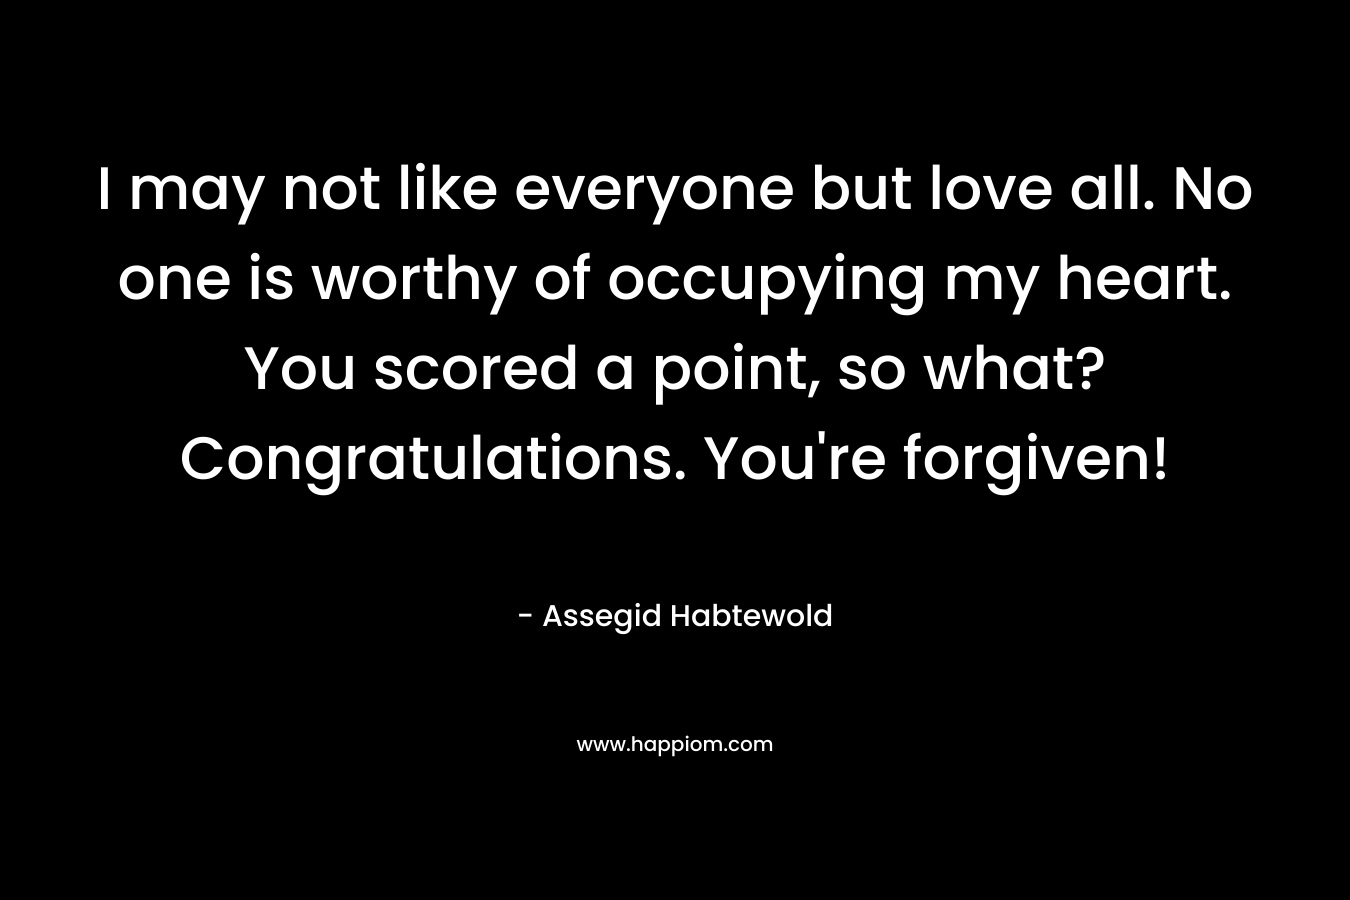 I may not like everyone but love all. No one is worthy of occupying my heart. You scored a point, so what? Congratulations. You’re forgiven! – Assegid Habtewold